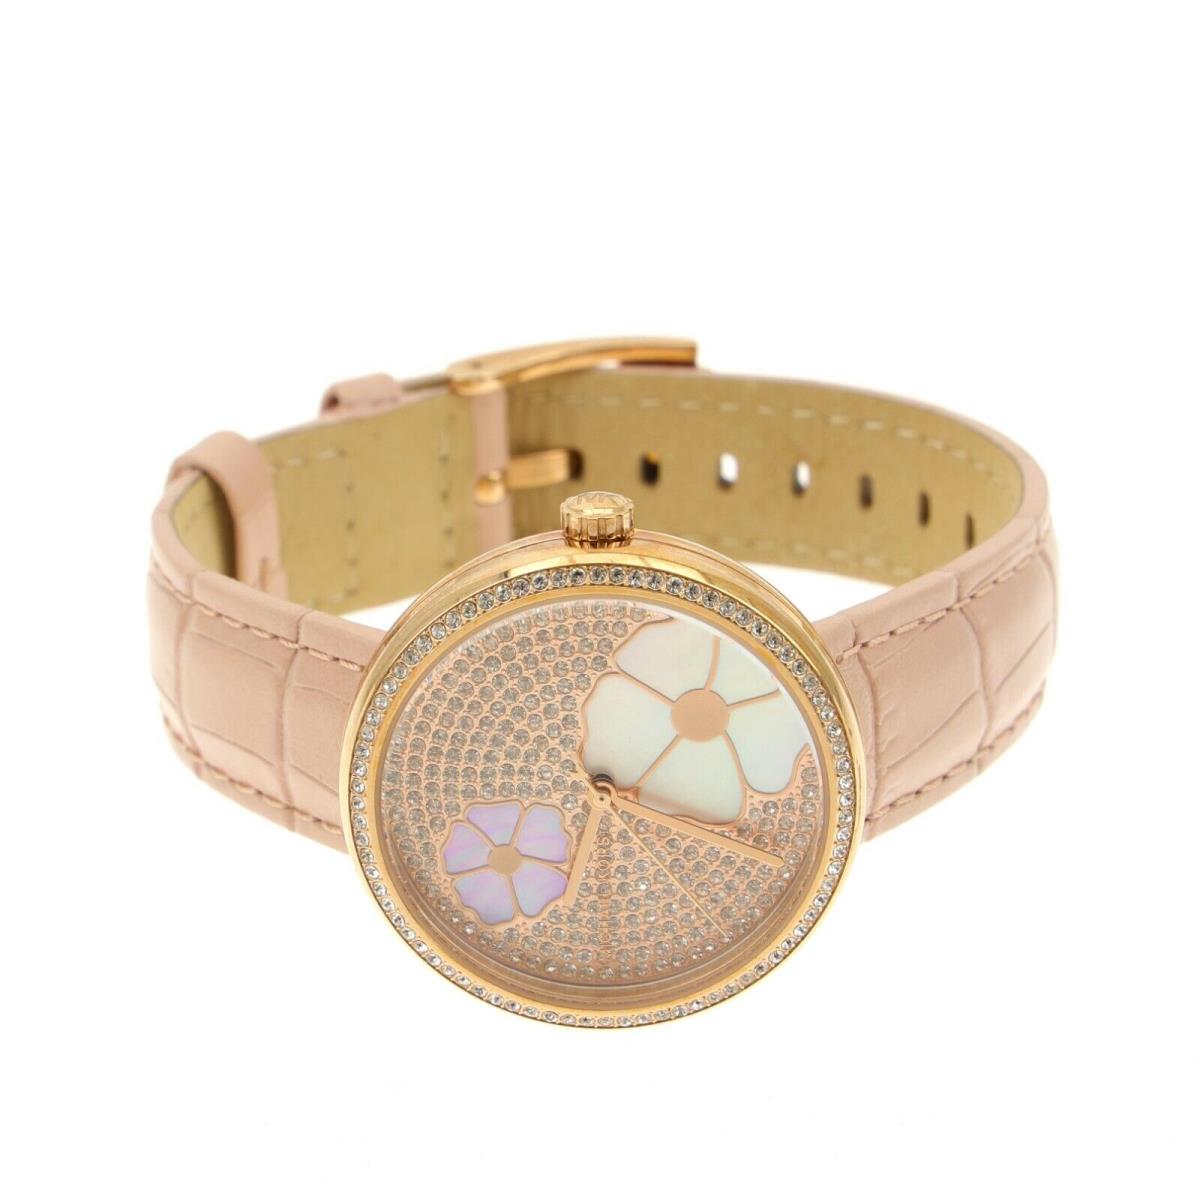 Michael Kors Courtney Crystal Leather Strap 36mm Watch 2374